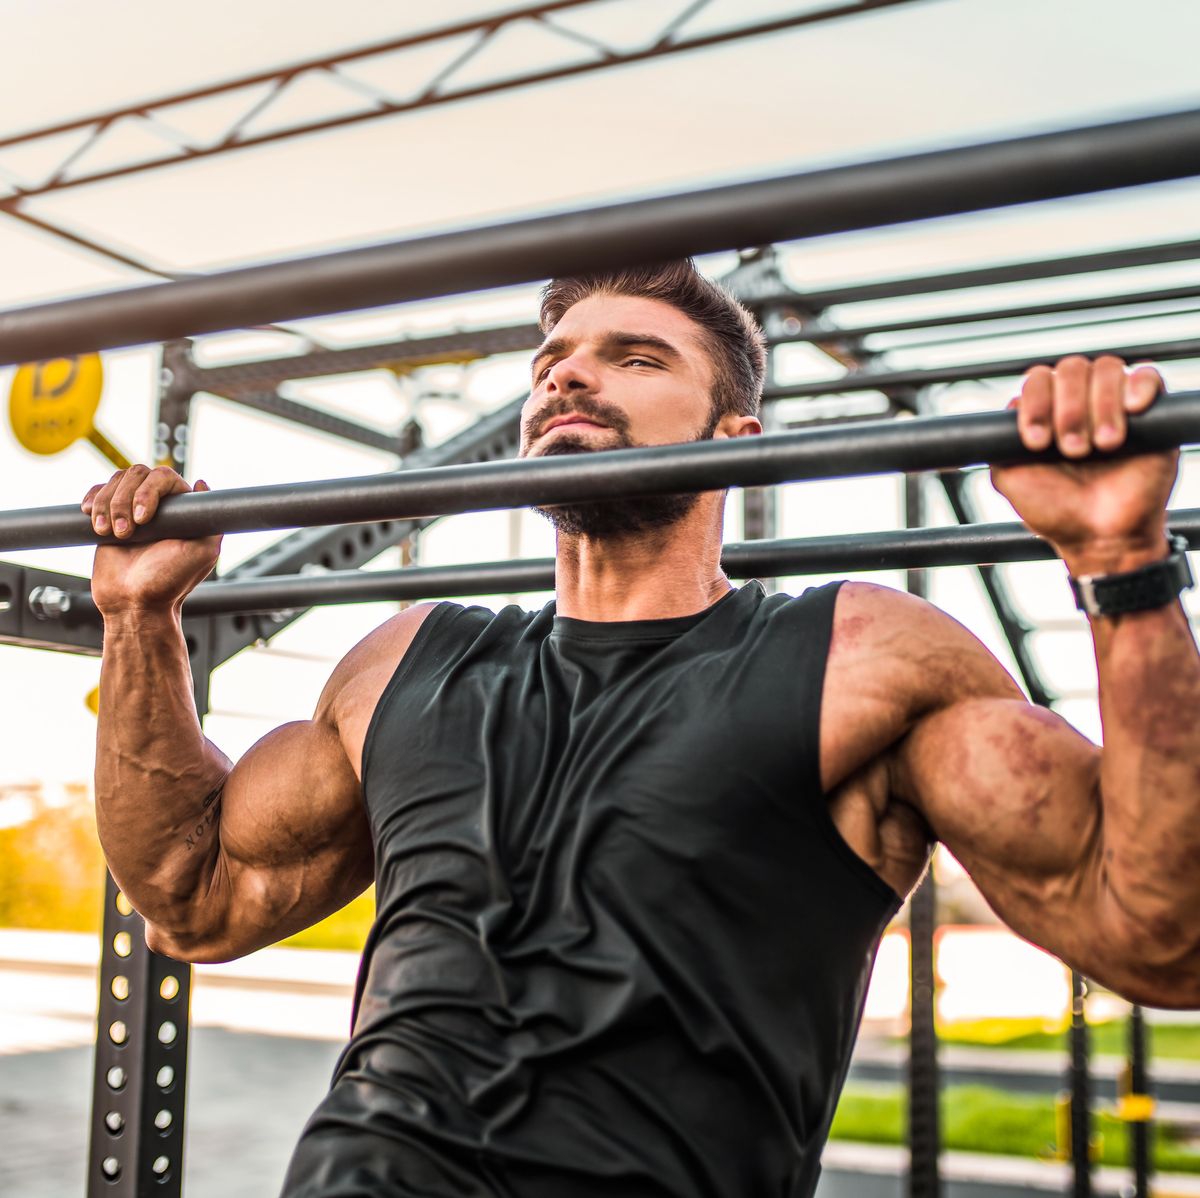 How To Get Better At Pull-Ups